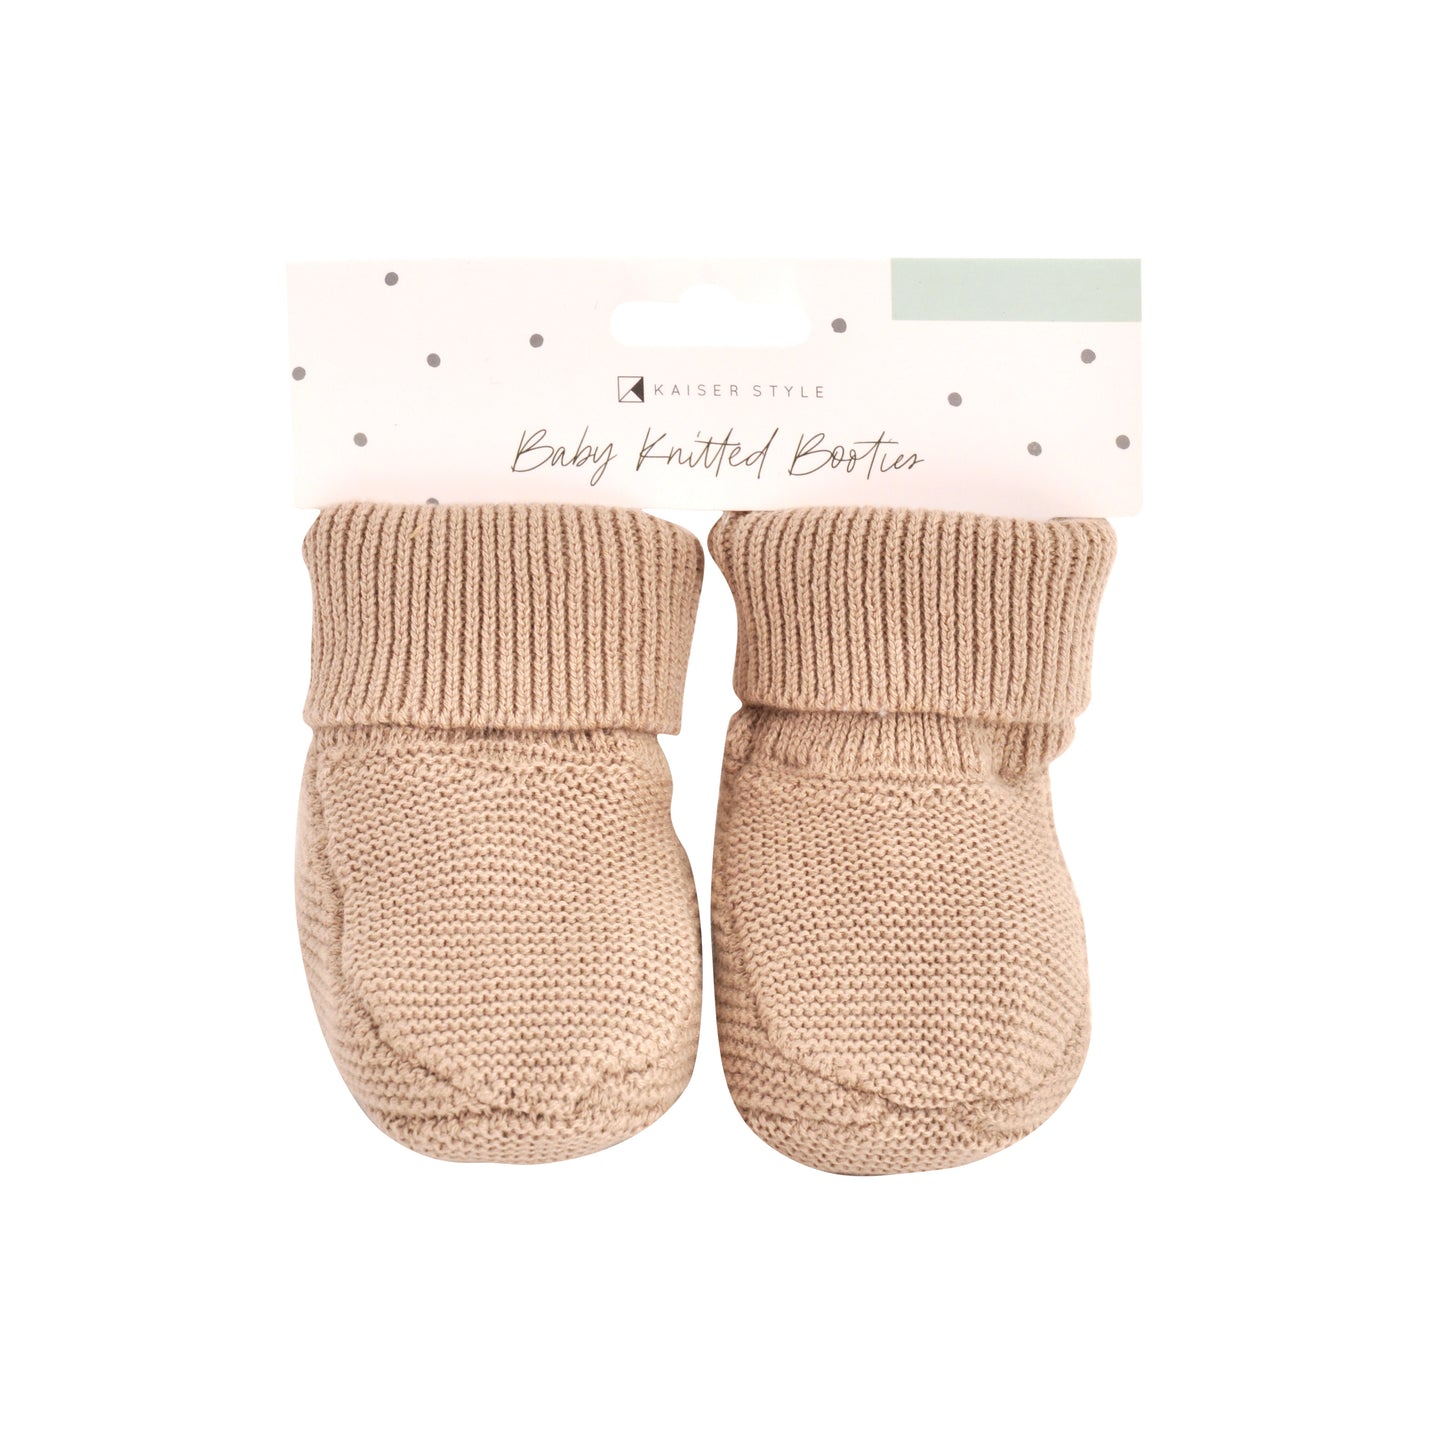 Baby Knitted Booties 6-12 Months - Natural